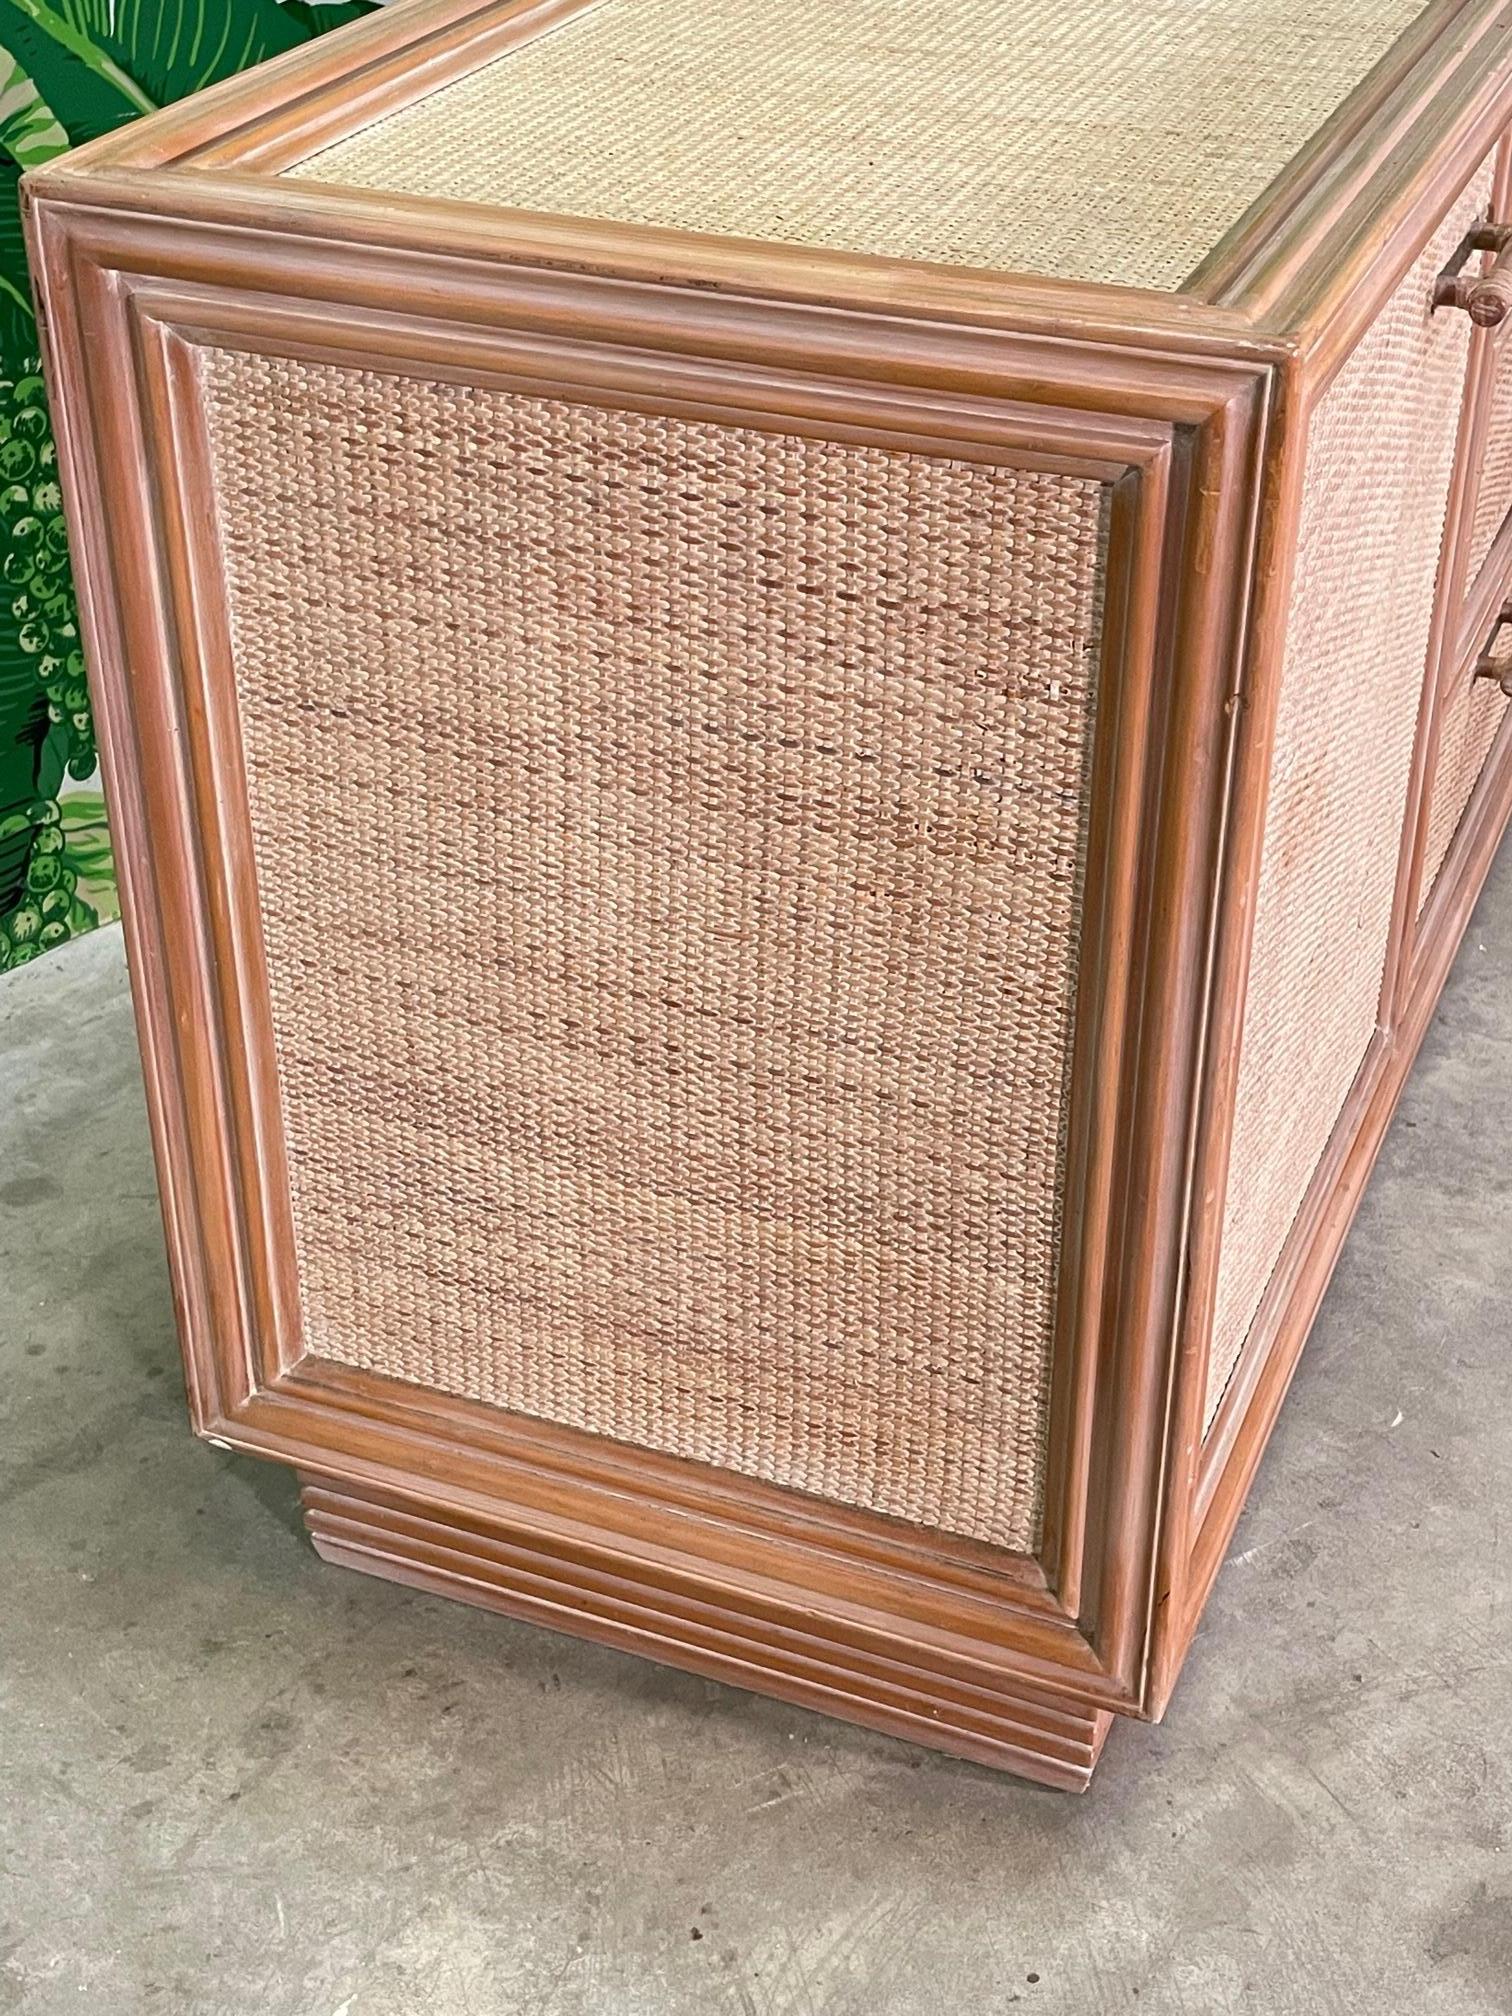 20th Century Rattan and Wicker Sideboard or Buffet Attribute to McGuire For Sale